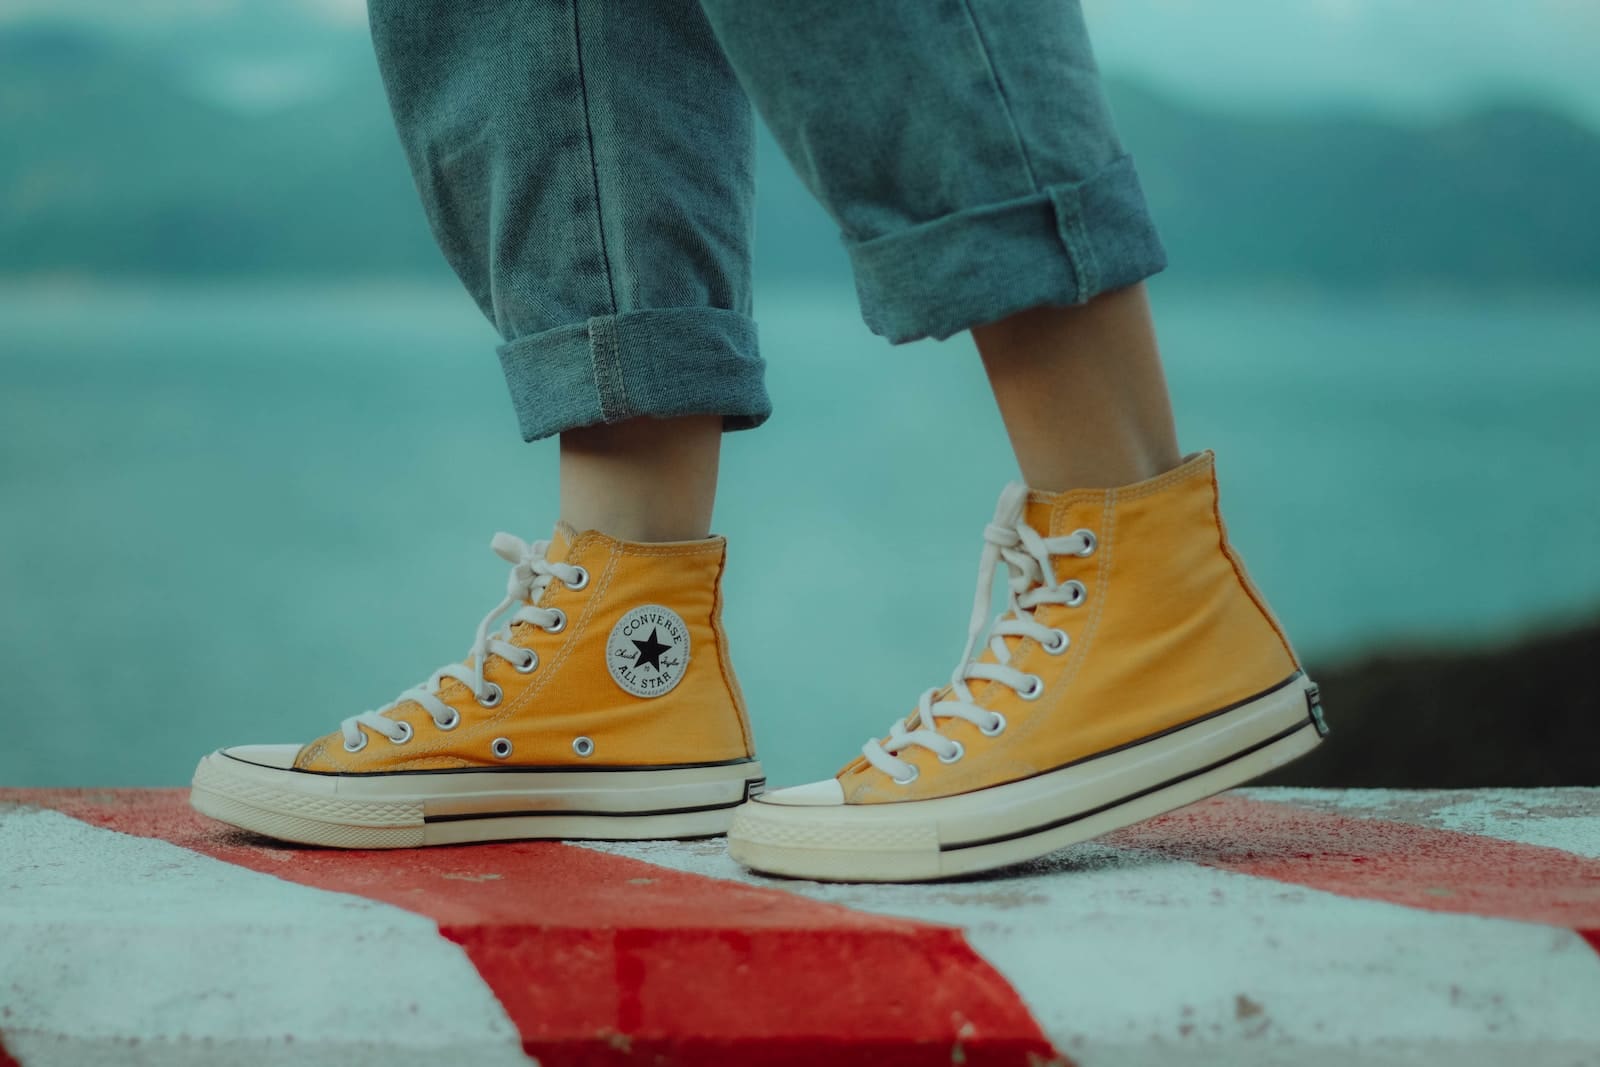 person wears yellow orange Converse All-Star high-top sneakers on their birthday